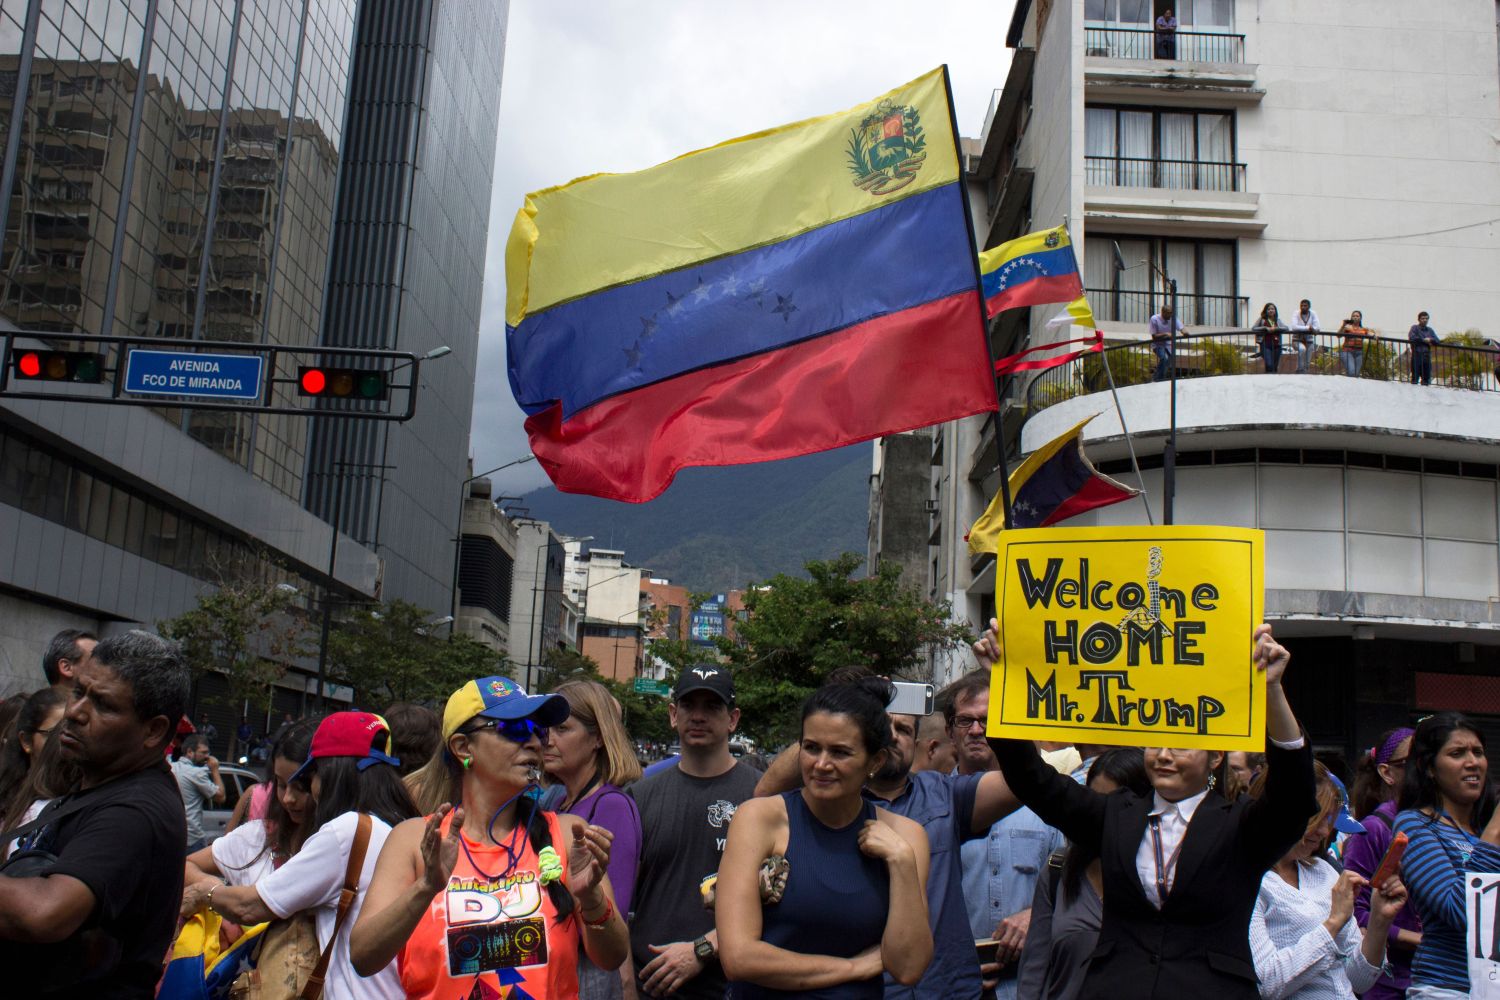 Caracas/Venezuela - January 30, 2019: Protesters hold banners welcoming Donald Trump aggressive moves on Venezuela and Juan Guaido, the U.S. backed opposition leader declared interim presiden